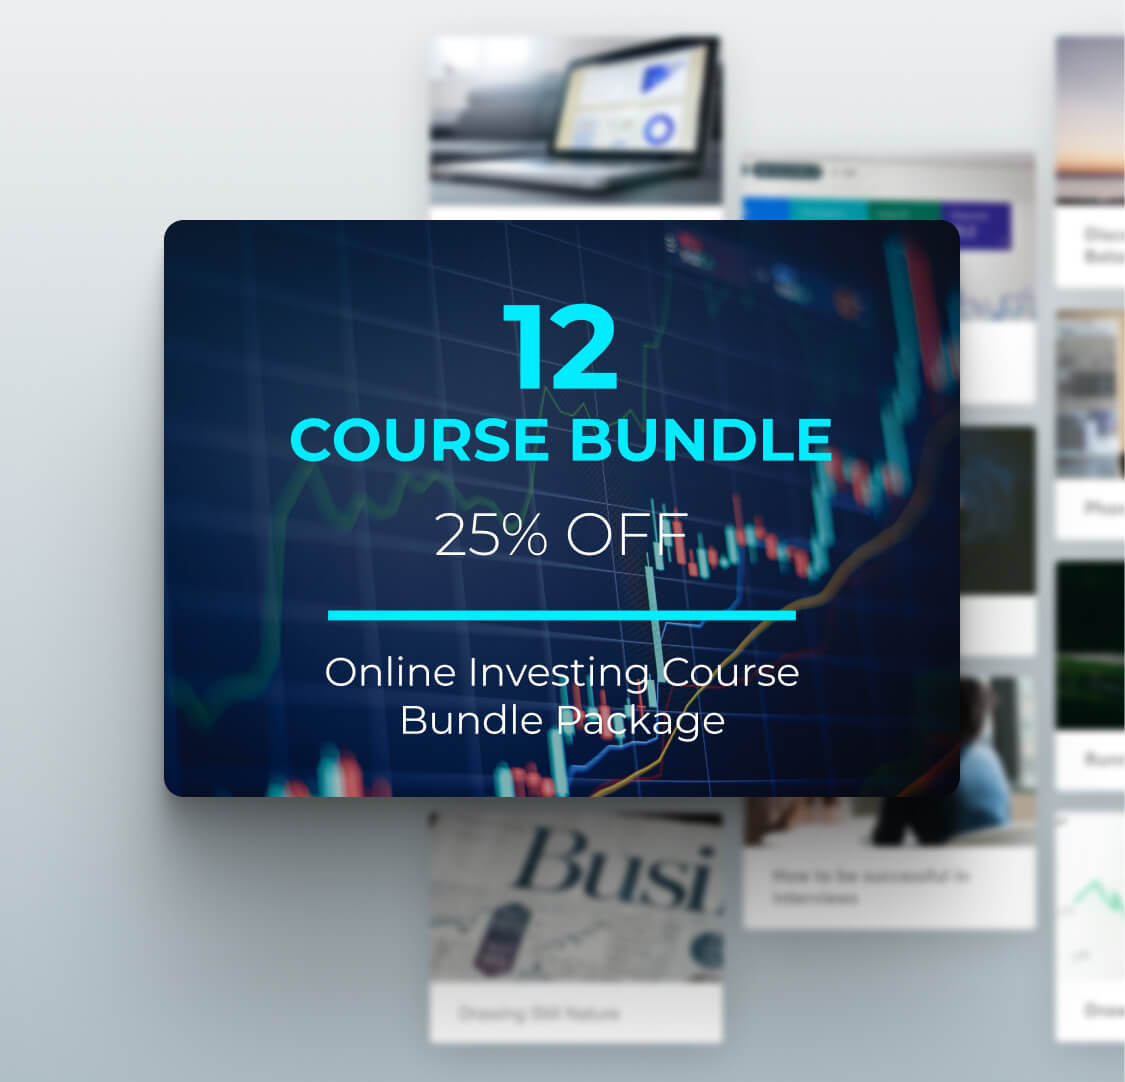 Generate more revenue from your online courses using subscriptions and bundles.